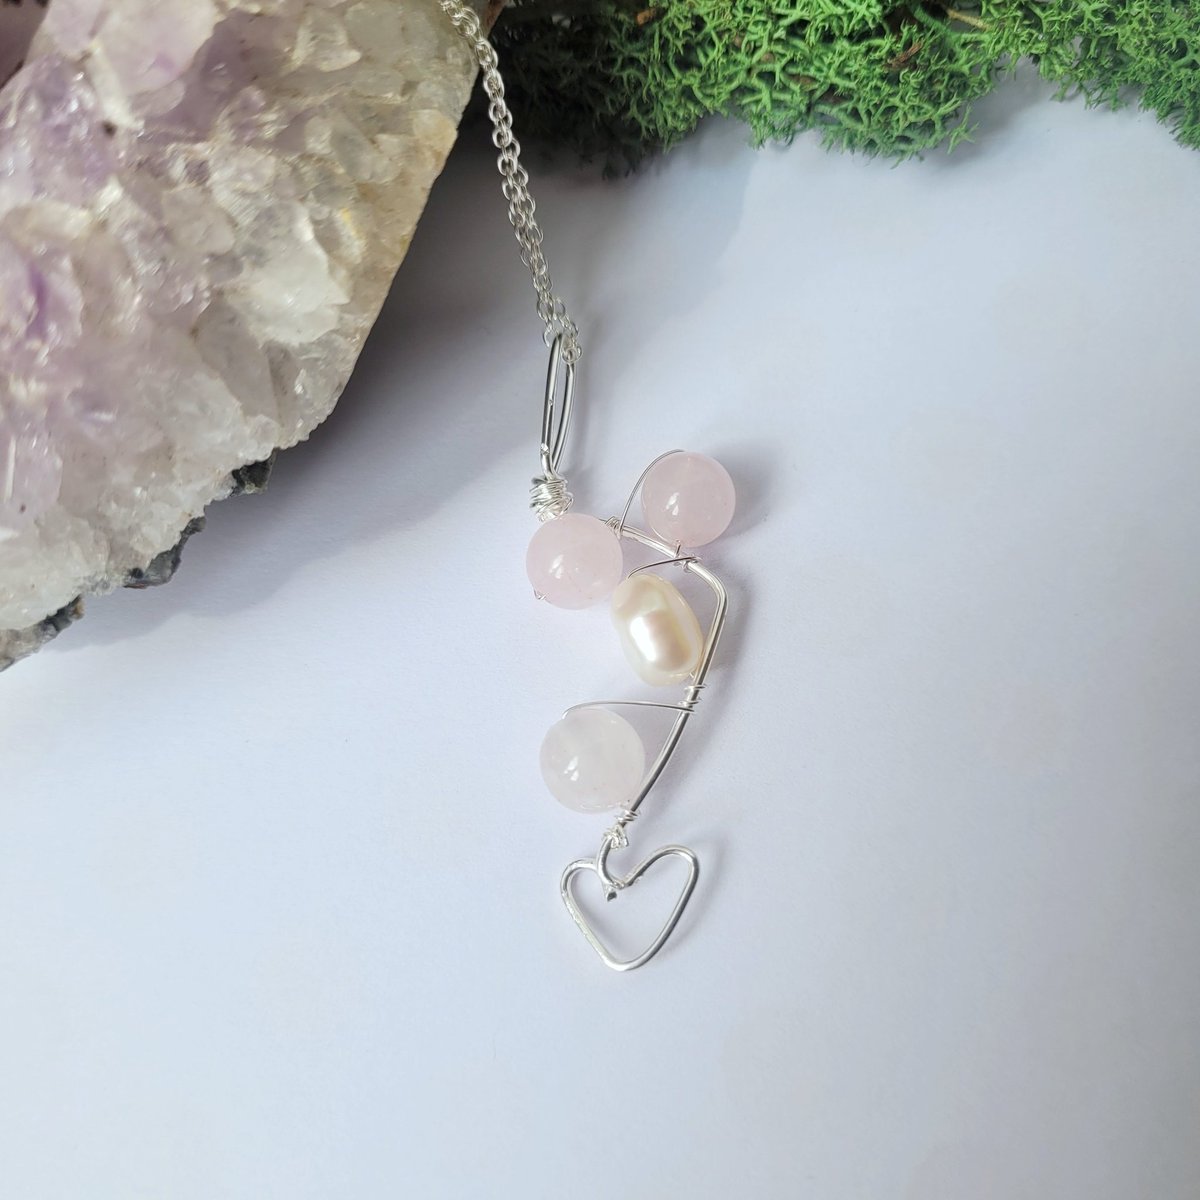 Heart necklace with soothing Rose Quartz and genuine Blister Pearl. thewildwoodlandwitch.etsy.com #MHHSBD #EarlyBiz